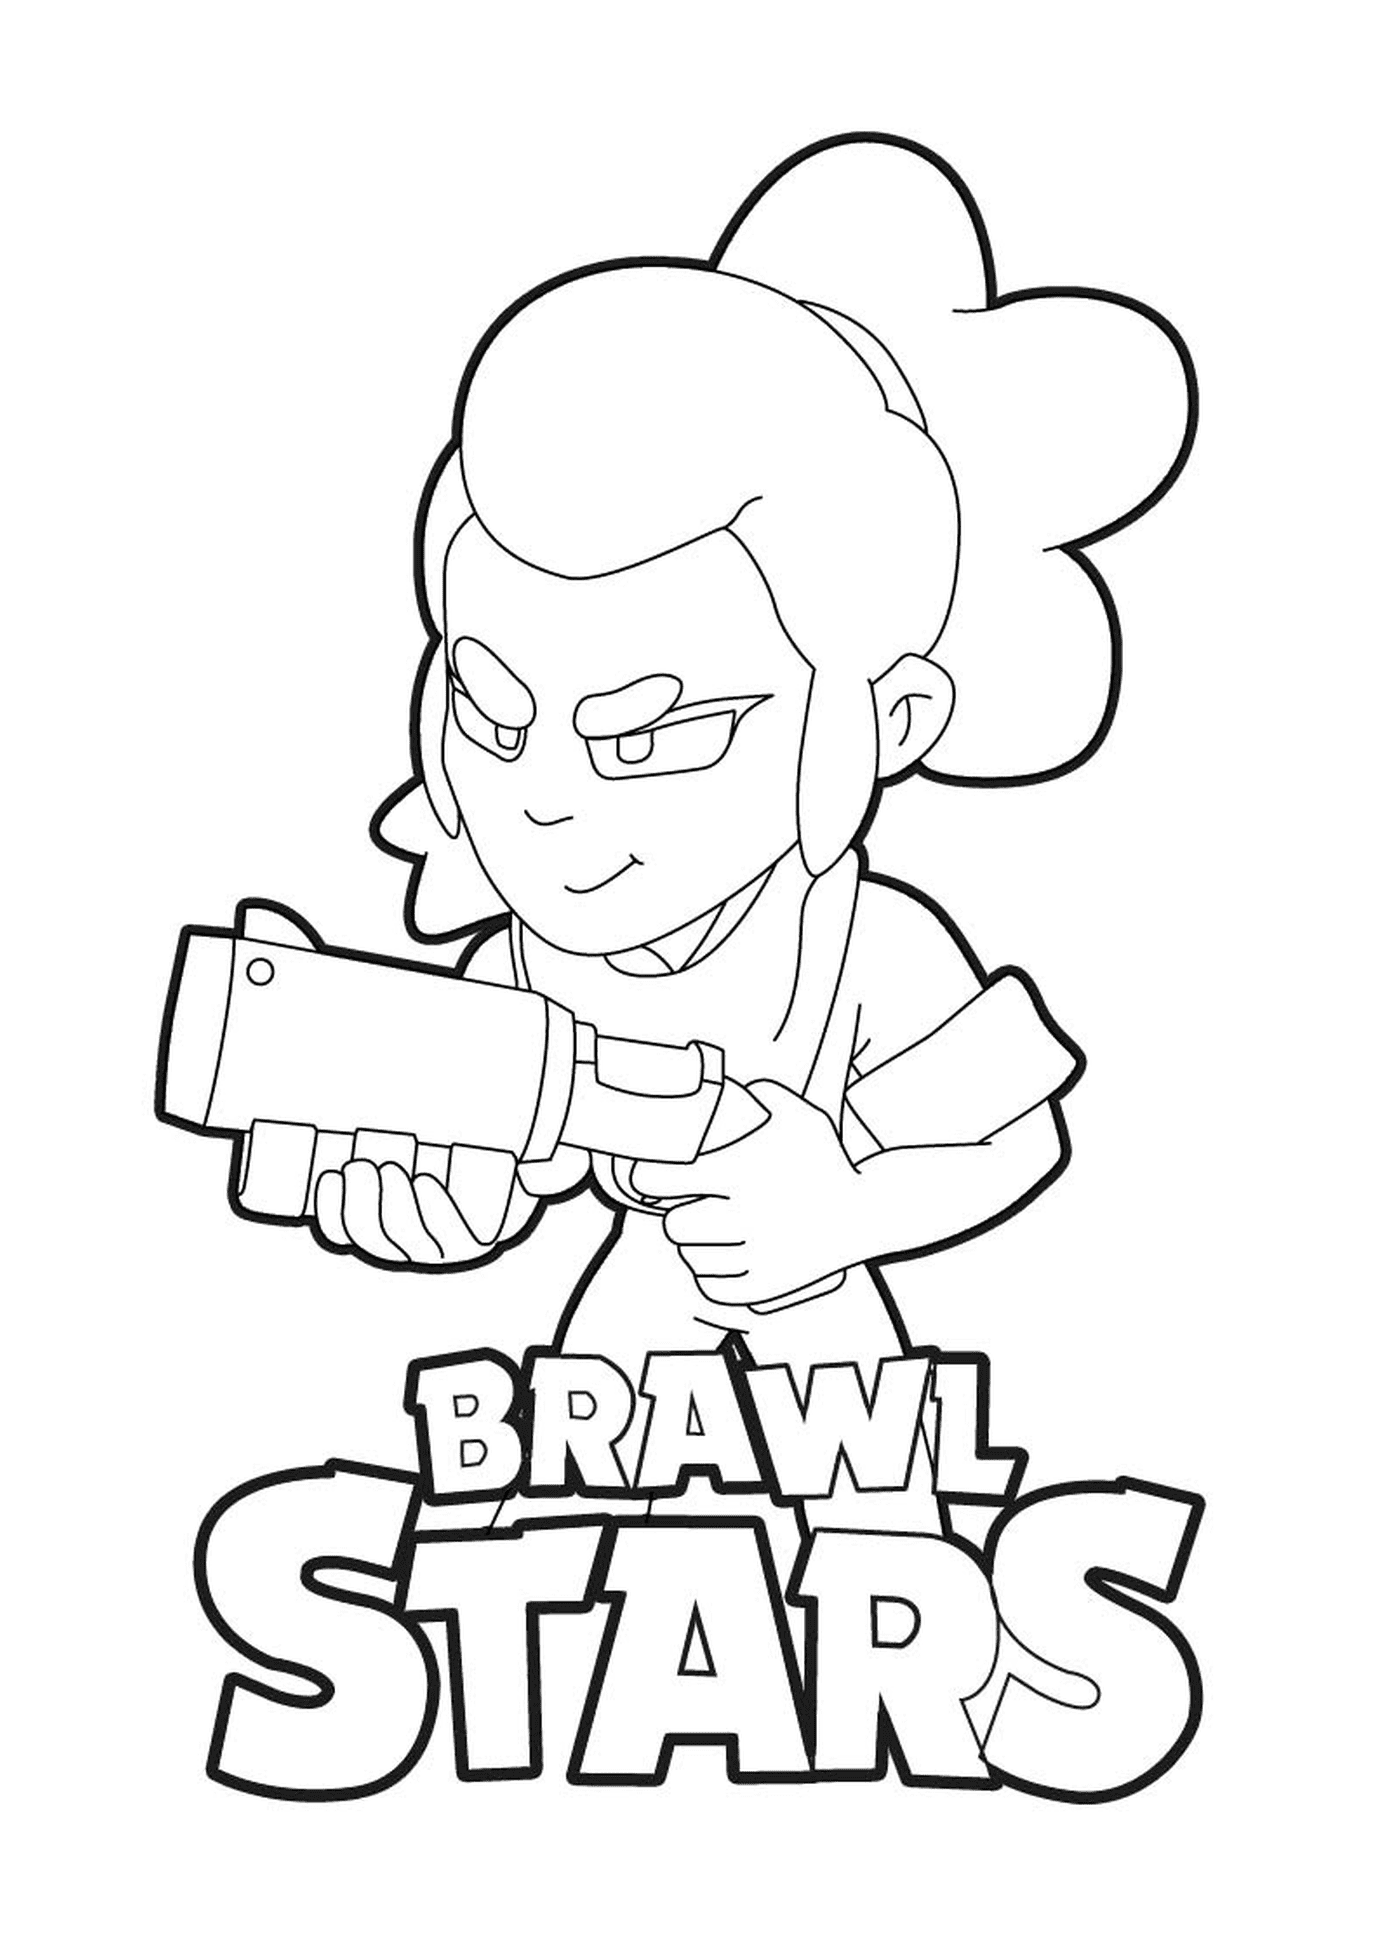  A Brawl Stars character named Shelly 